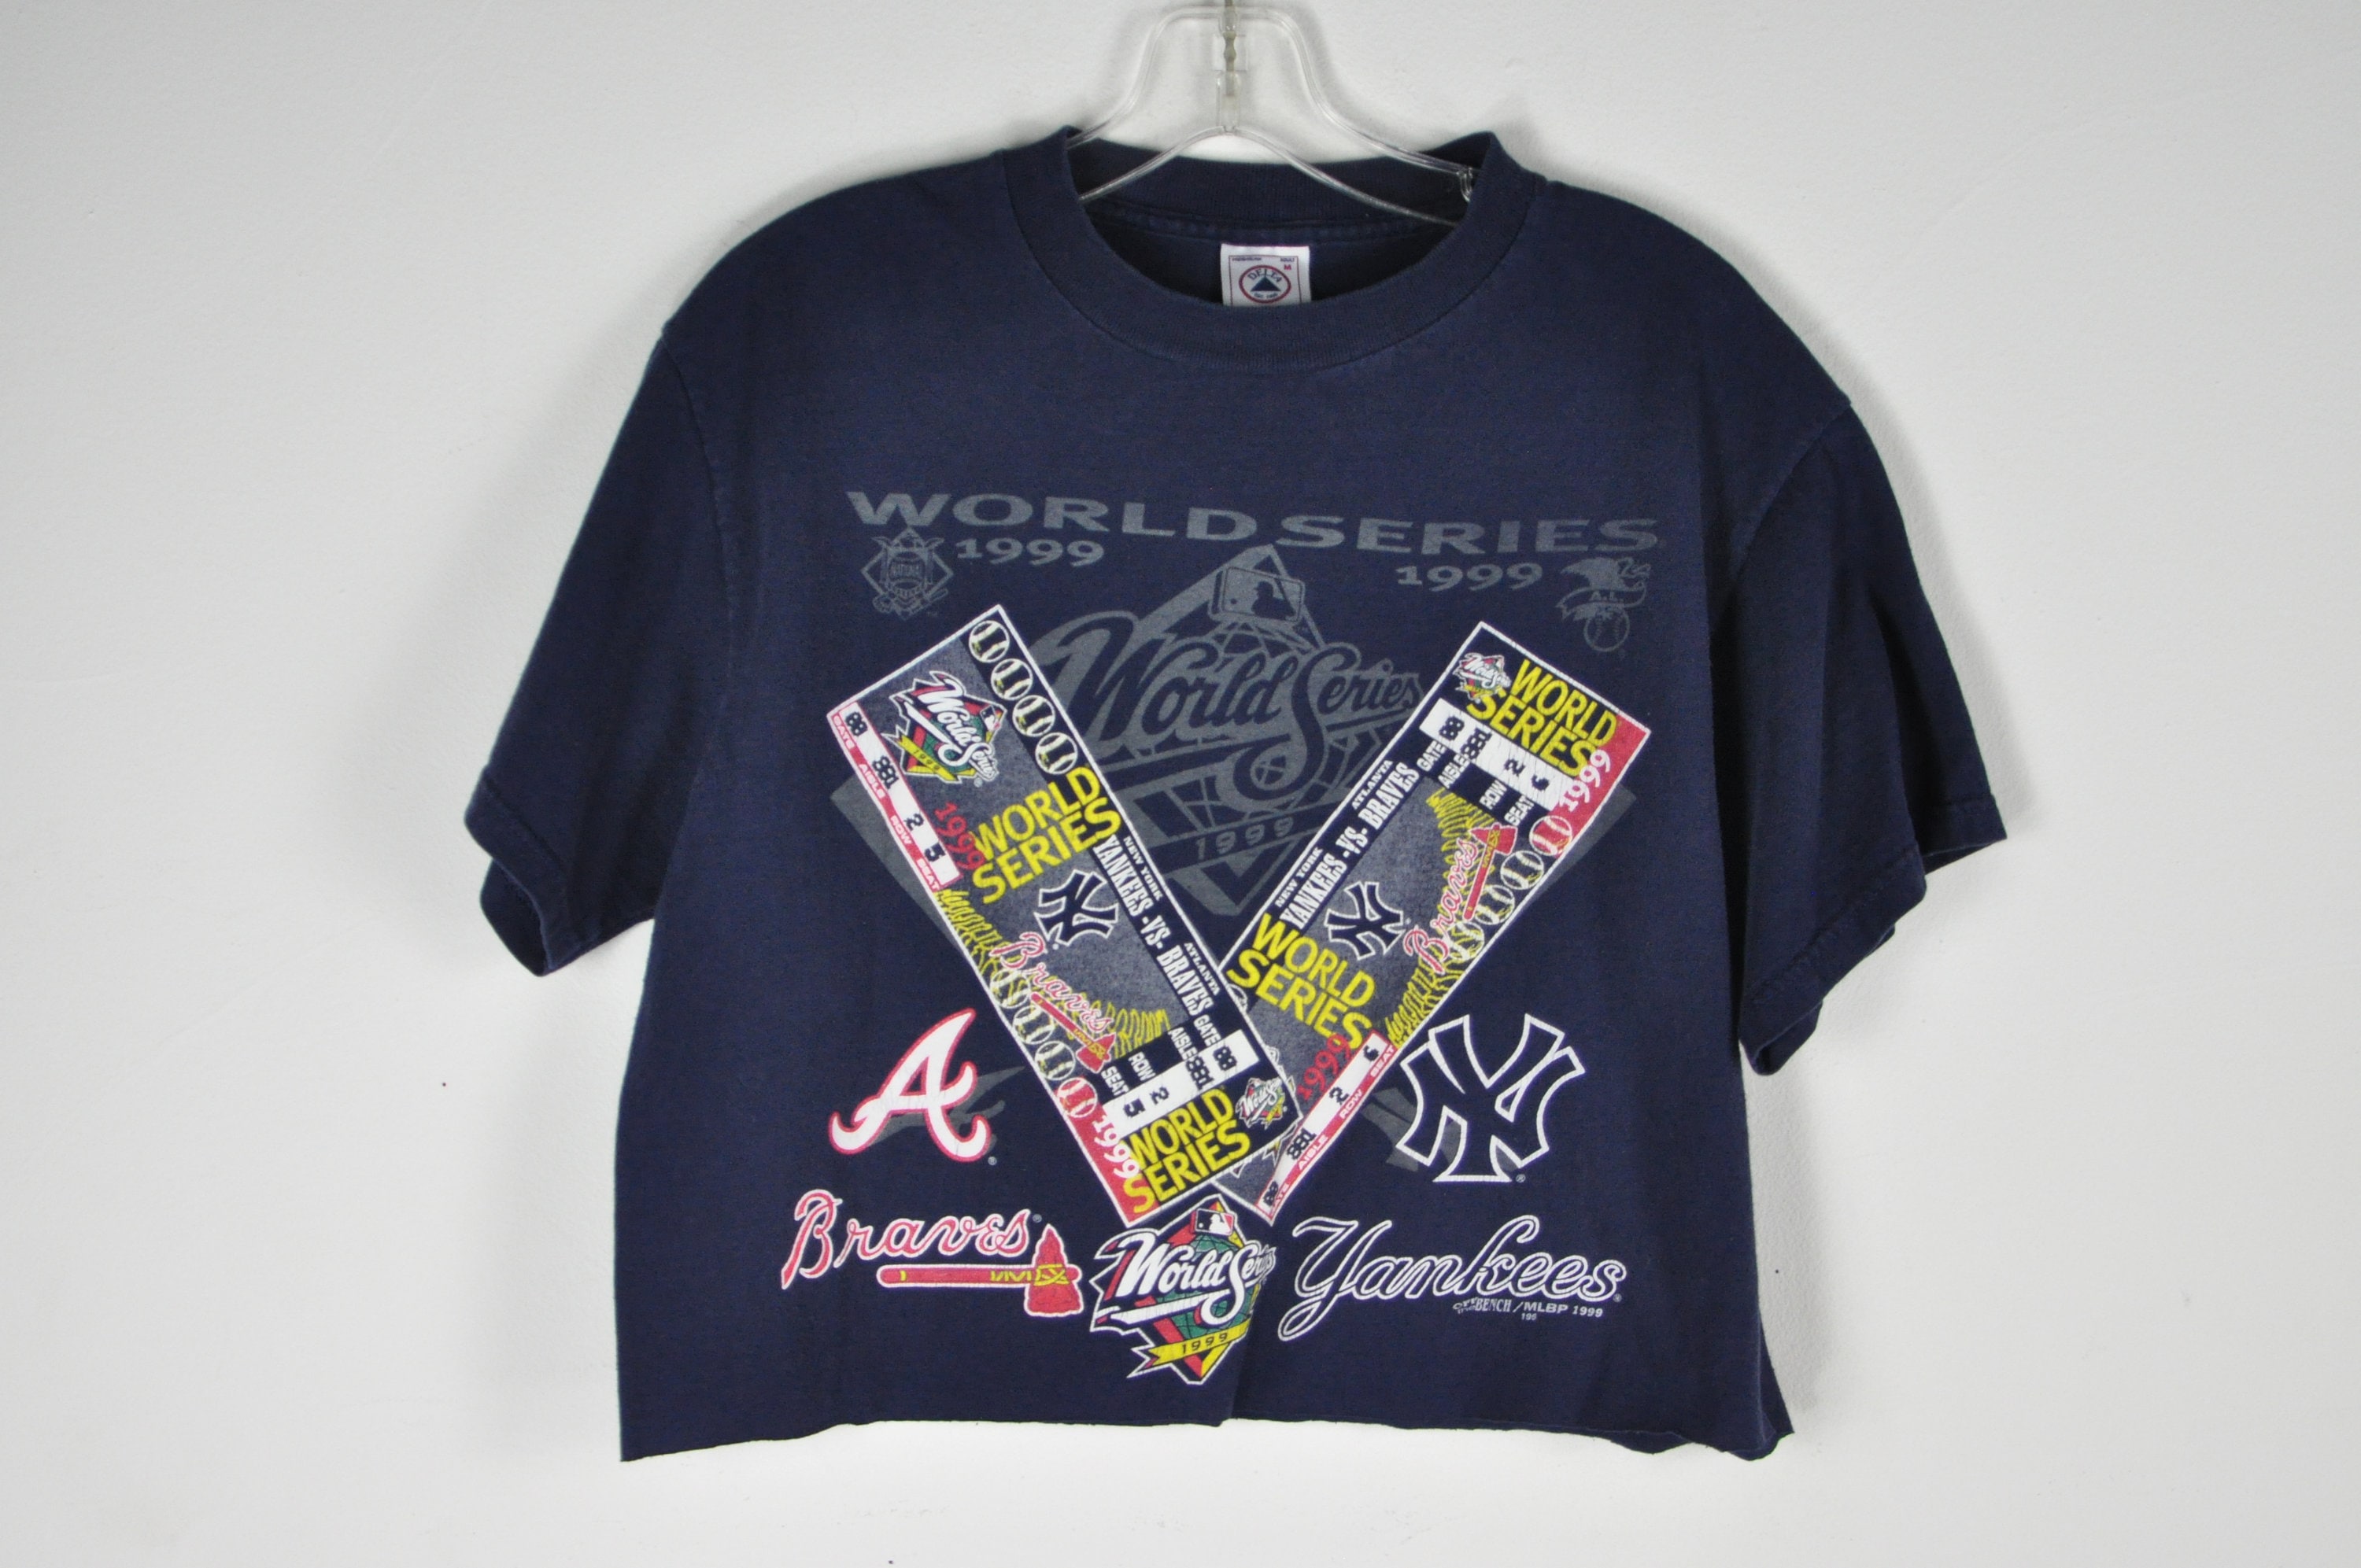 Atlanta Braves 2021 World Series Champions T-Shirt from Homage. | Grey | Vintage Apparel from Homage.